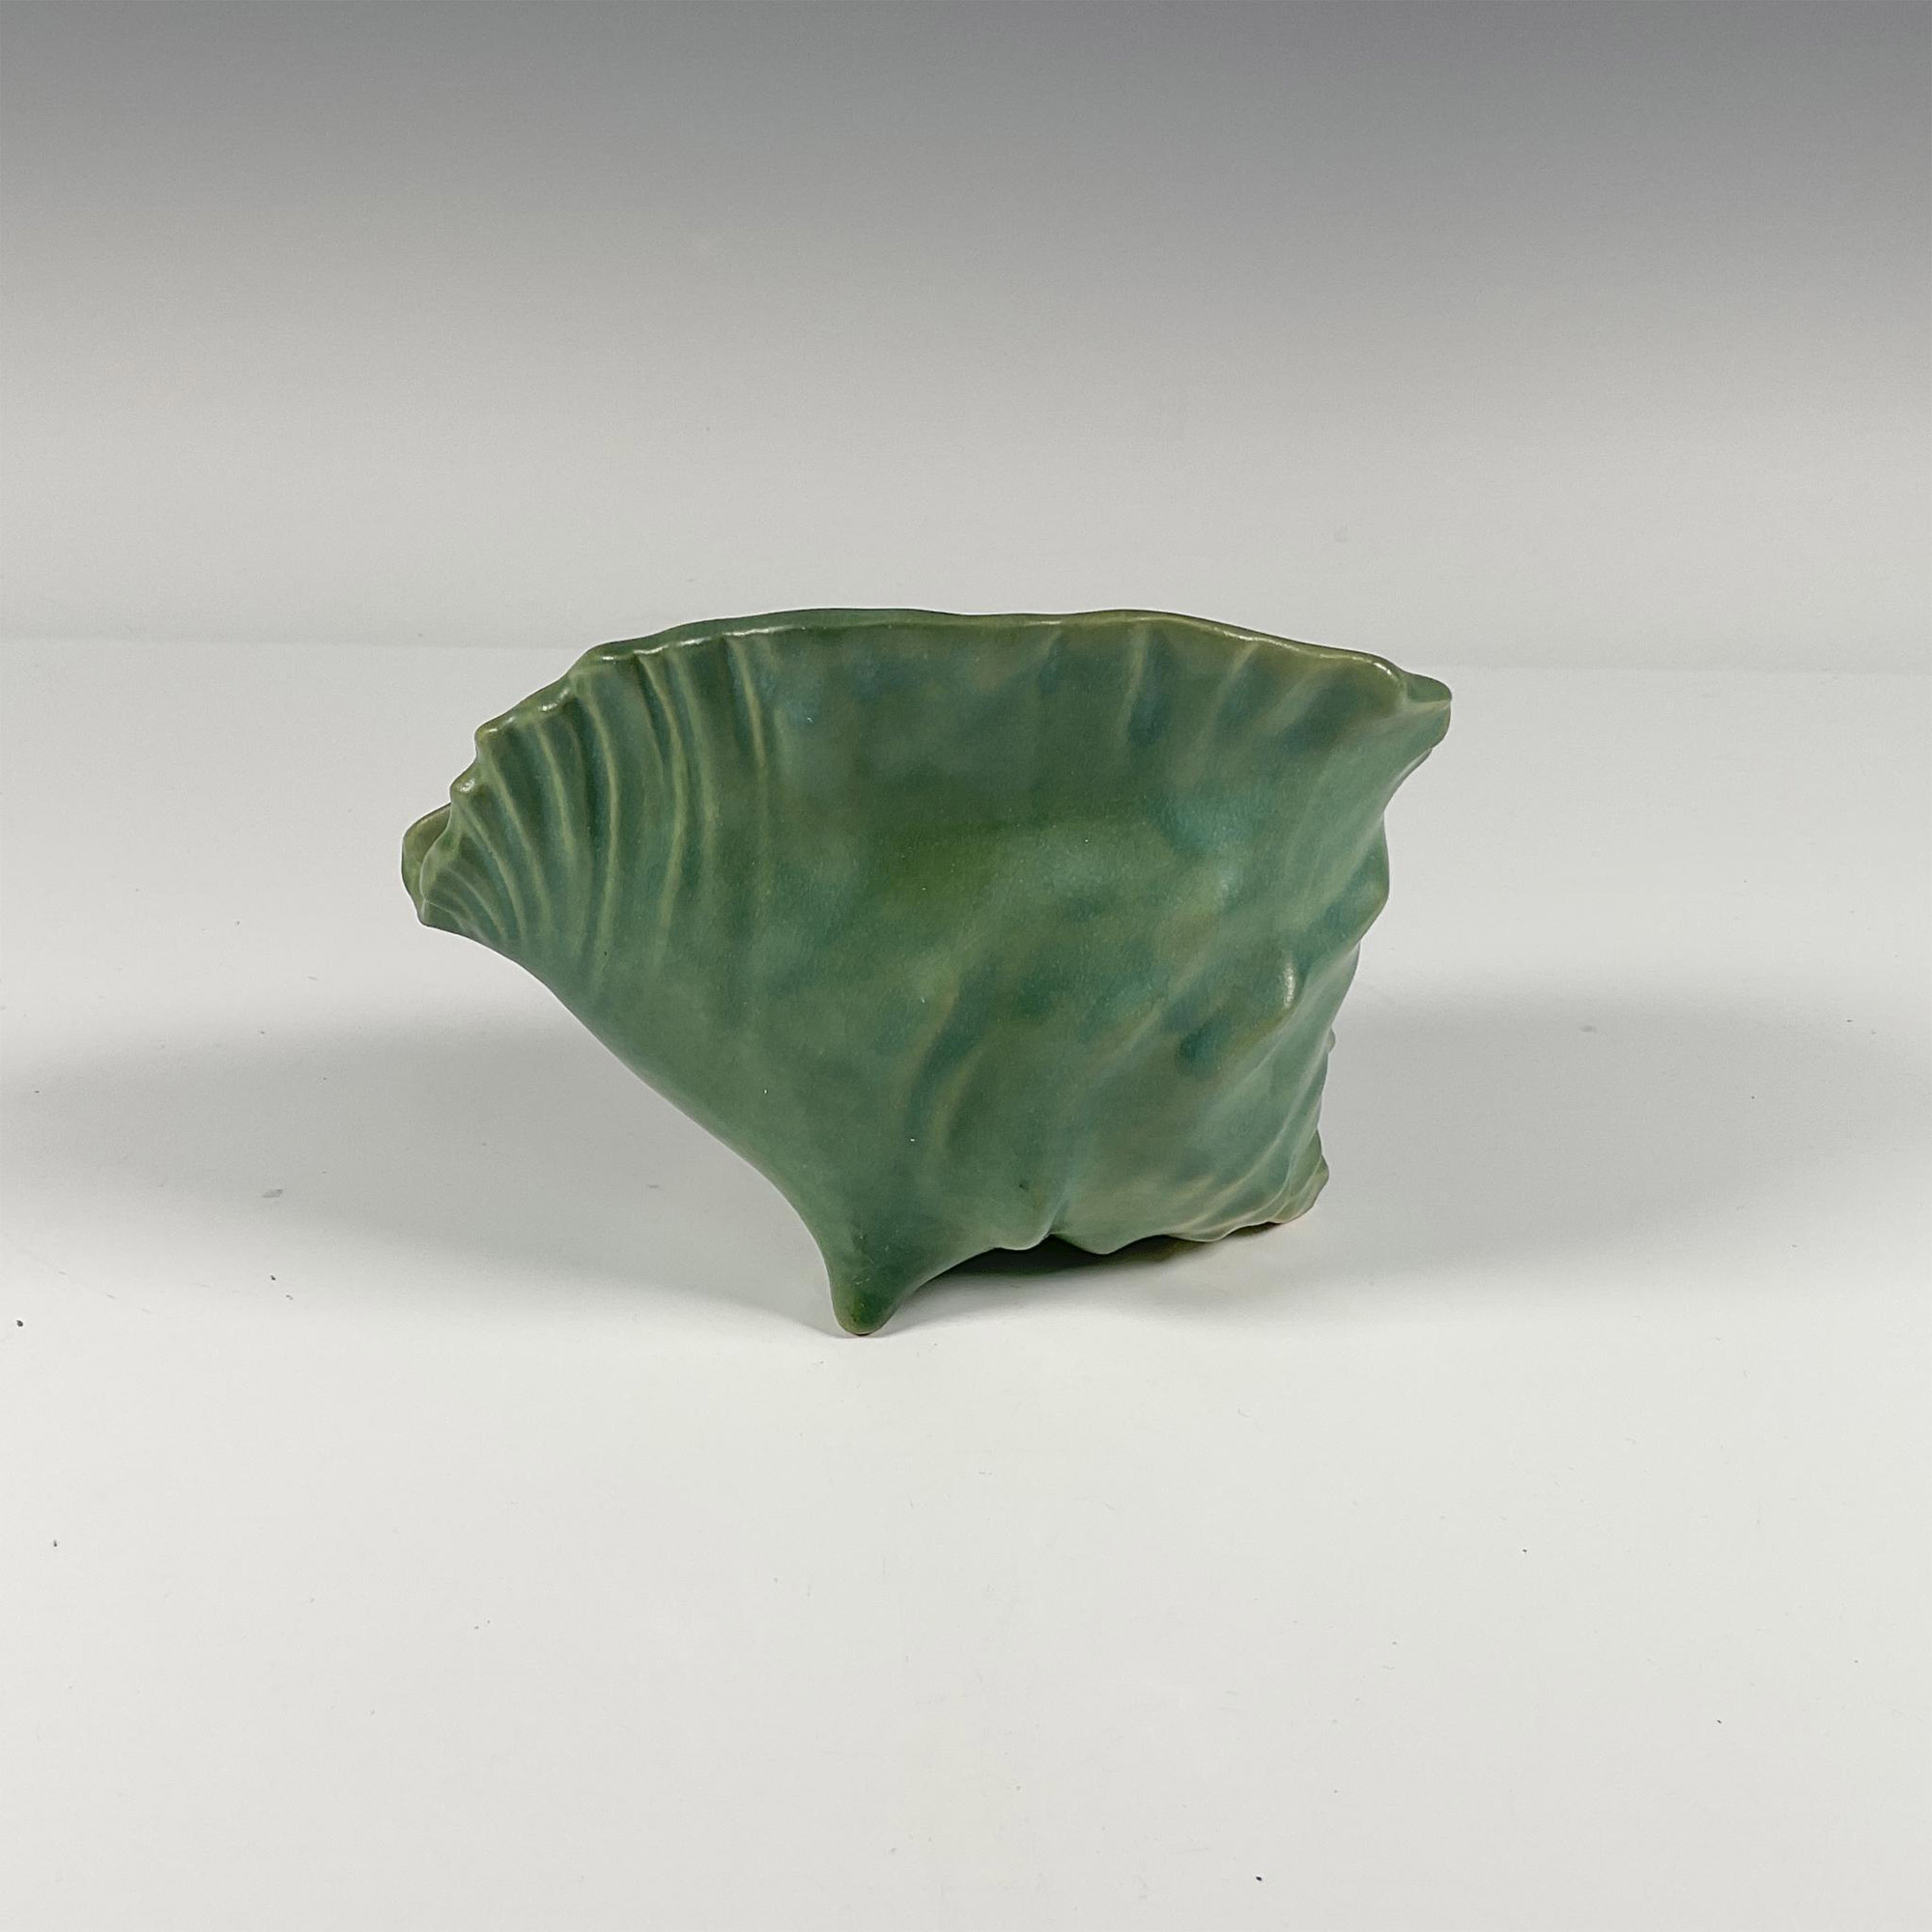 Roseville Pottery, Green Magnolia Conch Shell Vase 453 - Image 2 of 3